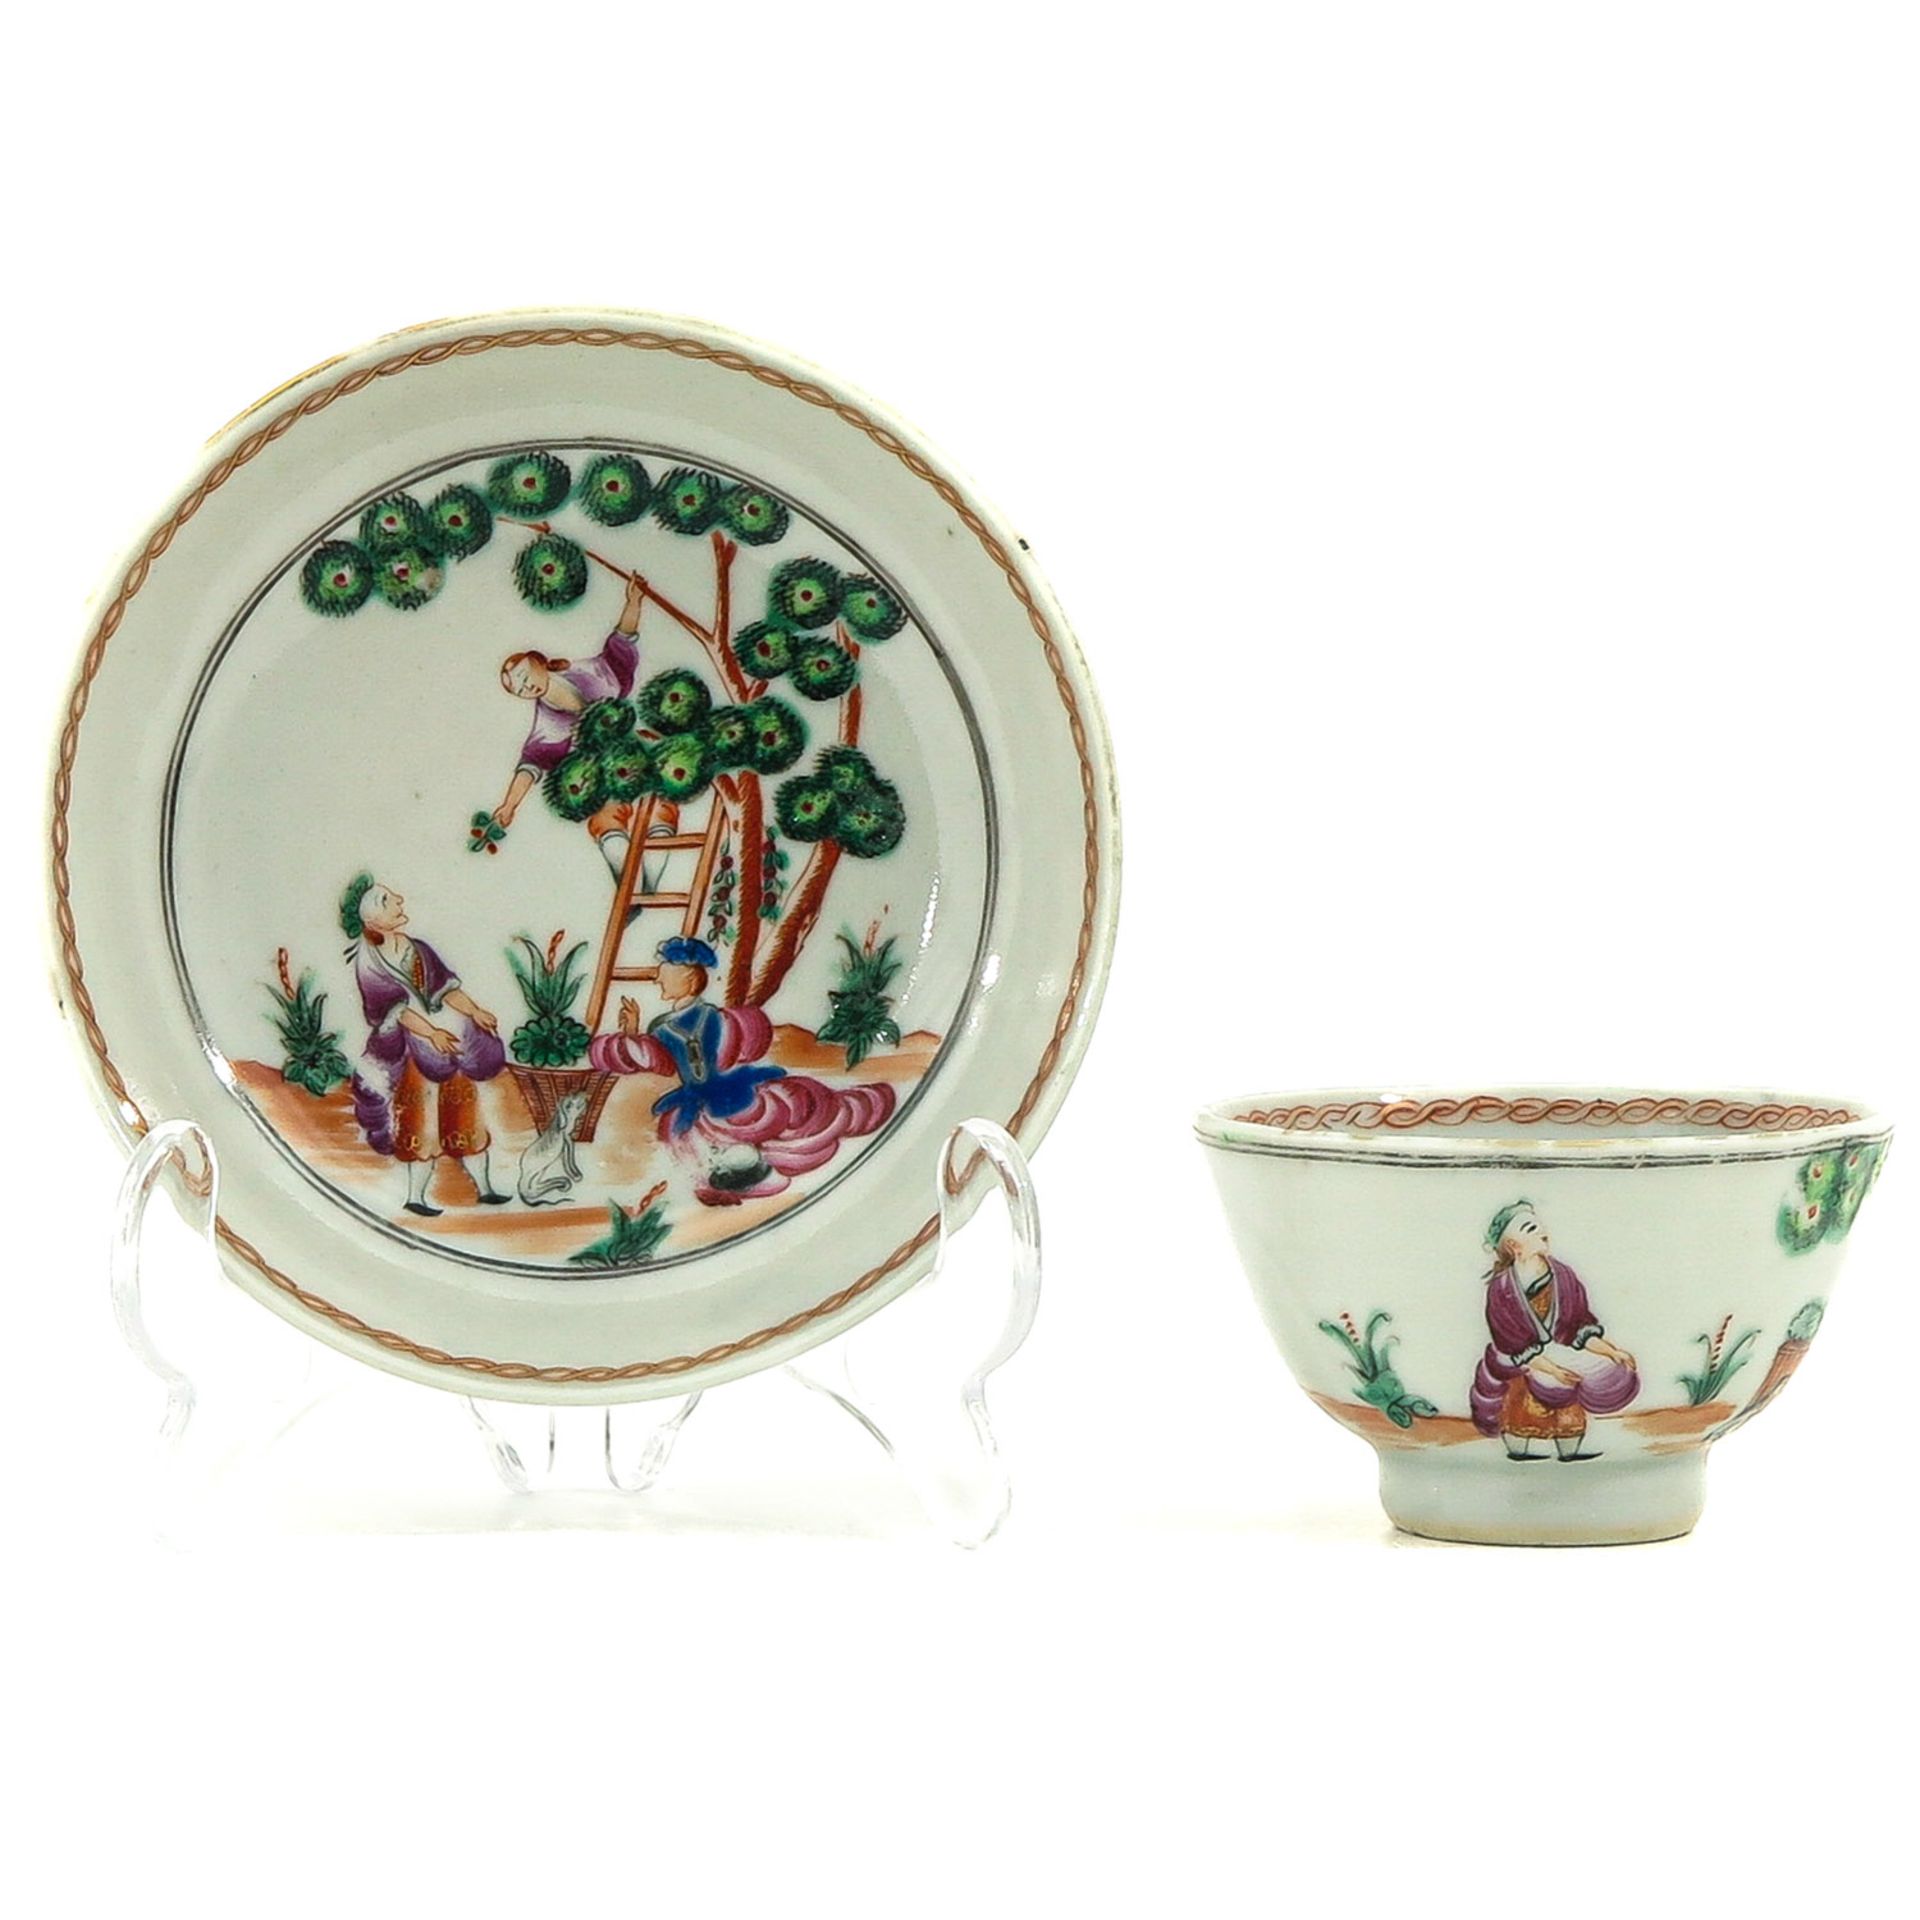 A Cherry Pickers Decor Cup and Saucer